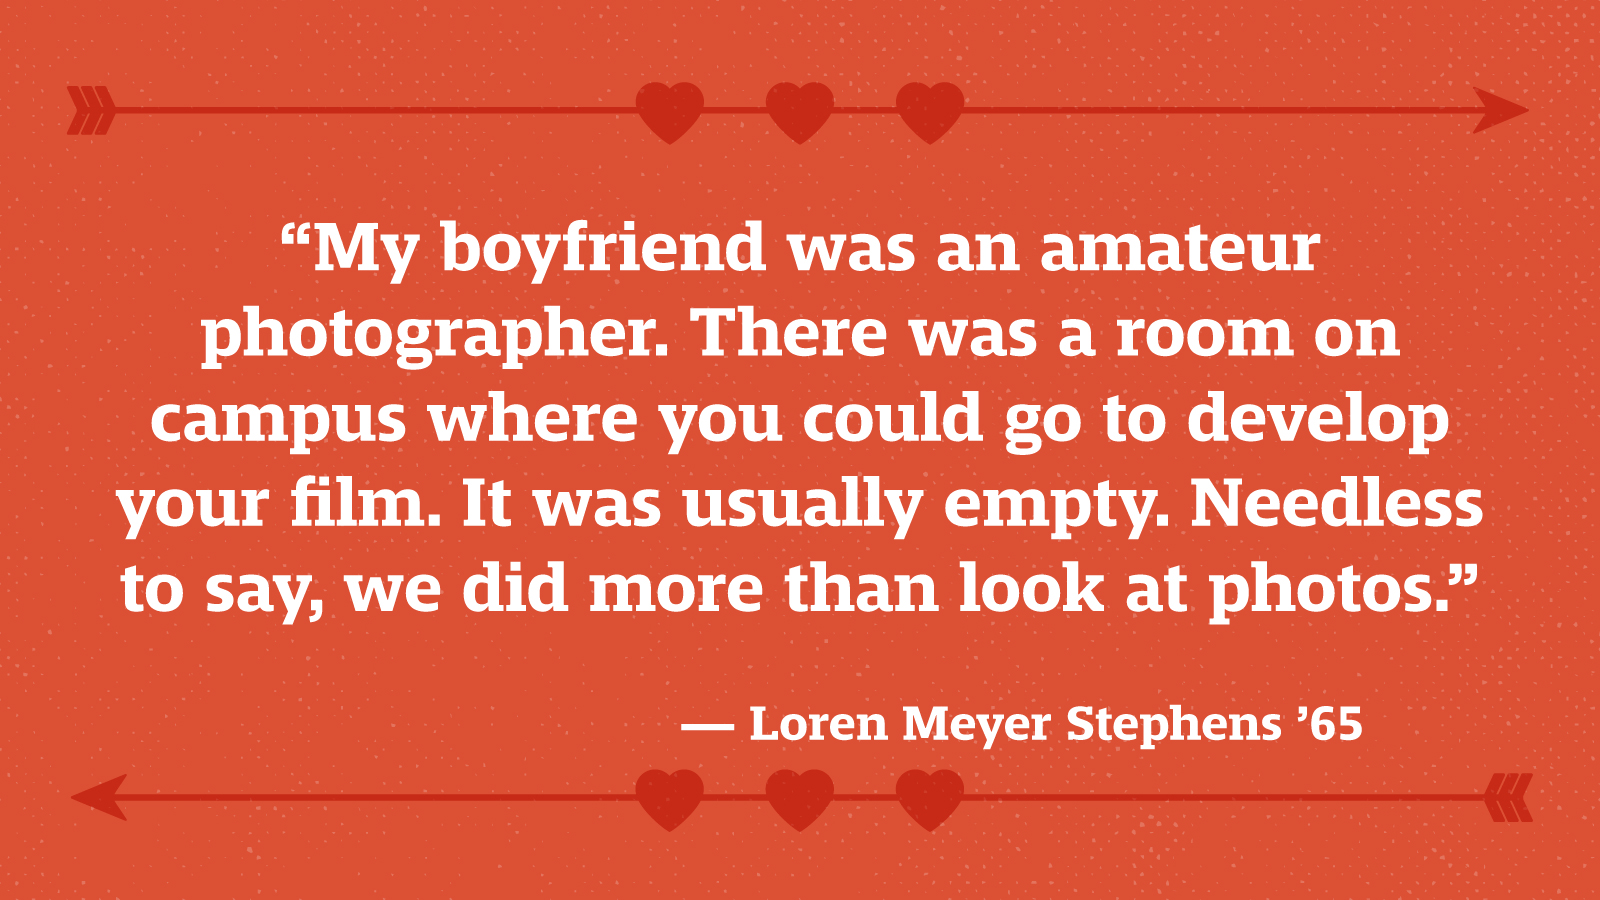 “My boyfriend was an amateur photographer. There was a room on campus where you could go to develop your film. It was usually empty. Needless to say, we did more than look at photos.” — Loren Meyer Stephens ’65